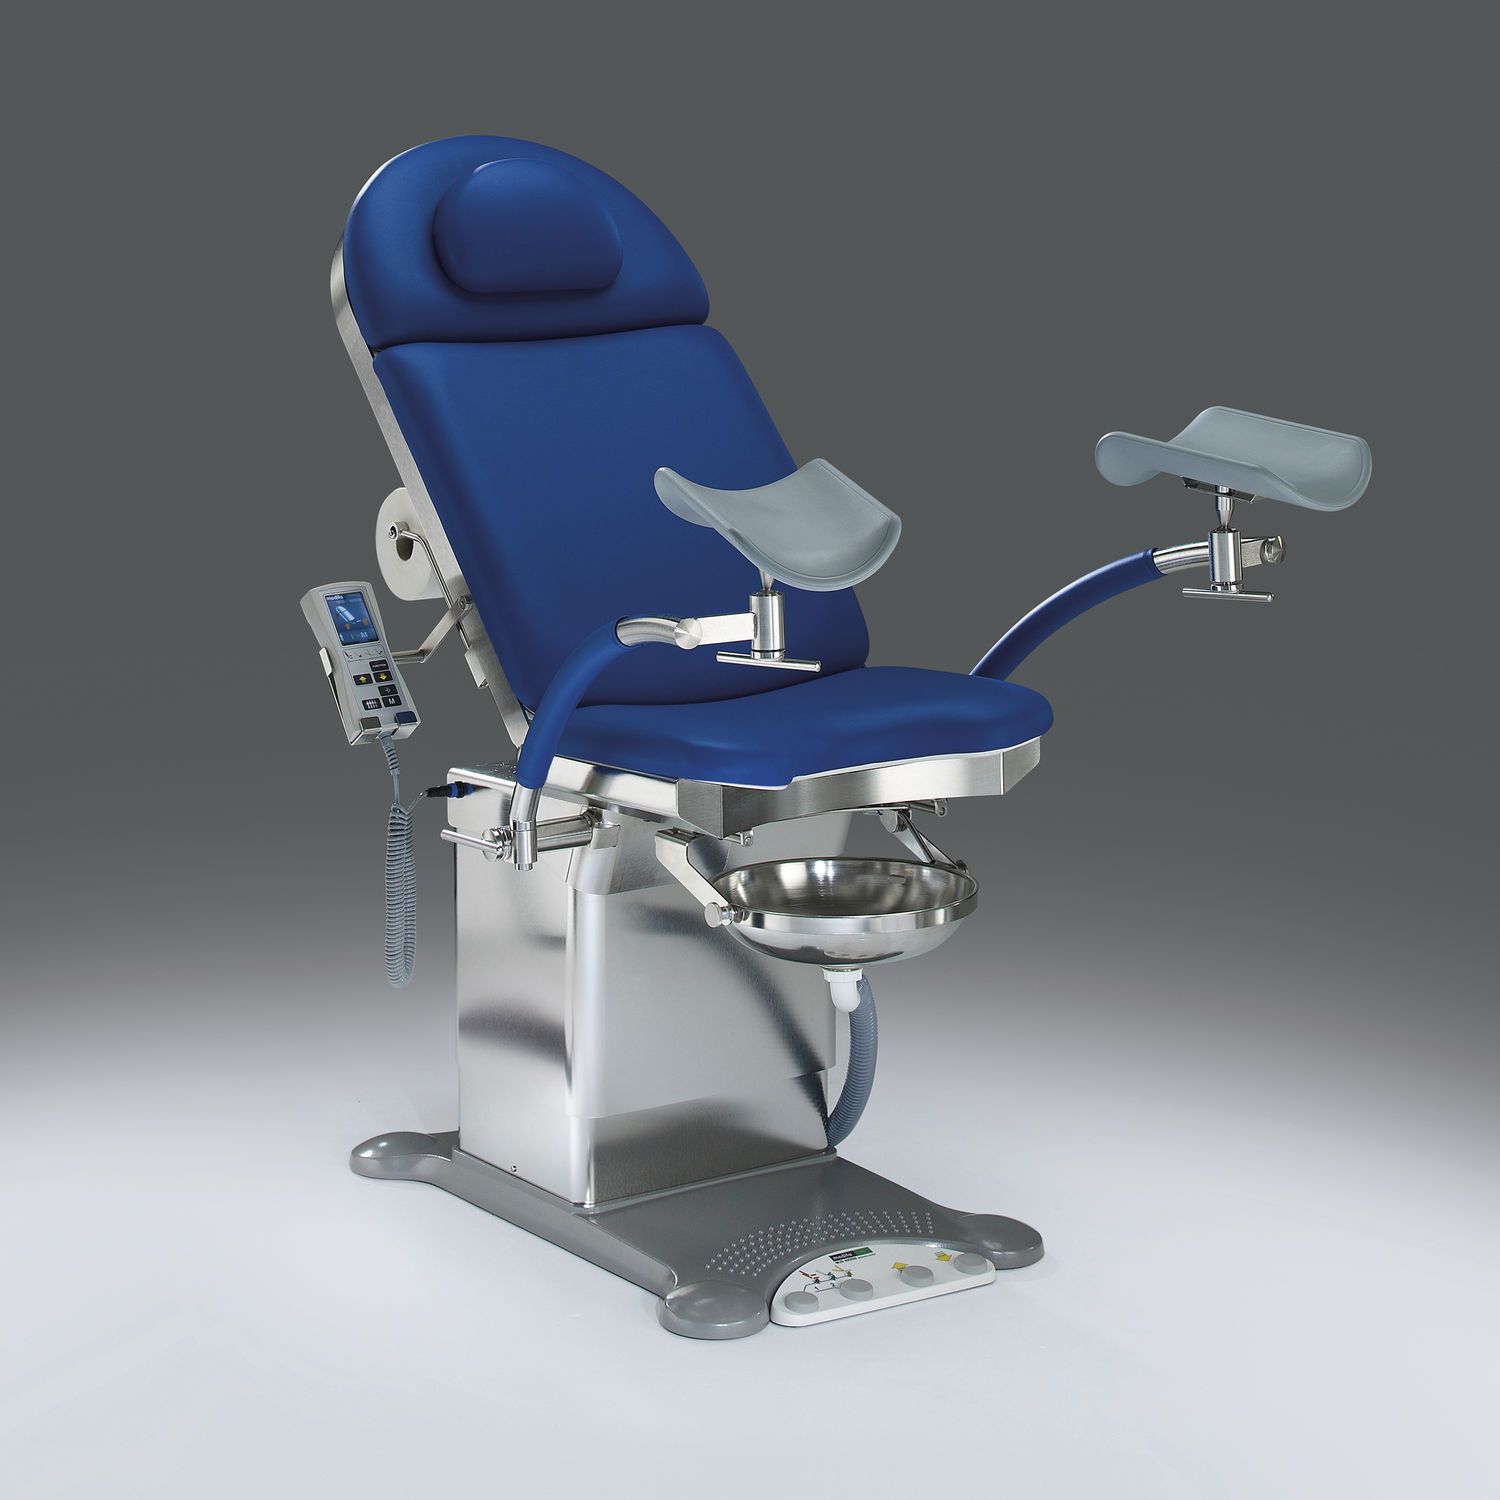 Urological examination chair / electrical / height-adjustable / 2-section 400550 + 91706 medifa-hesse GmbH & Co. KG